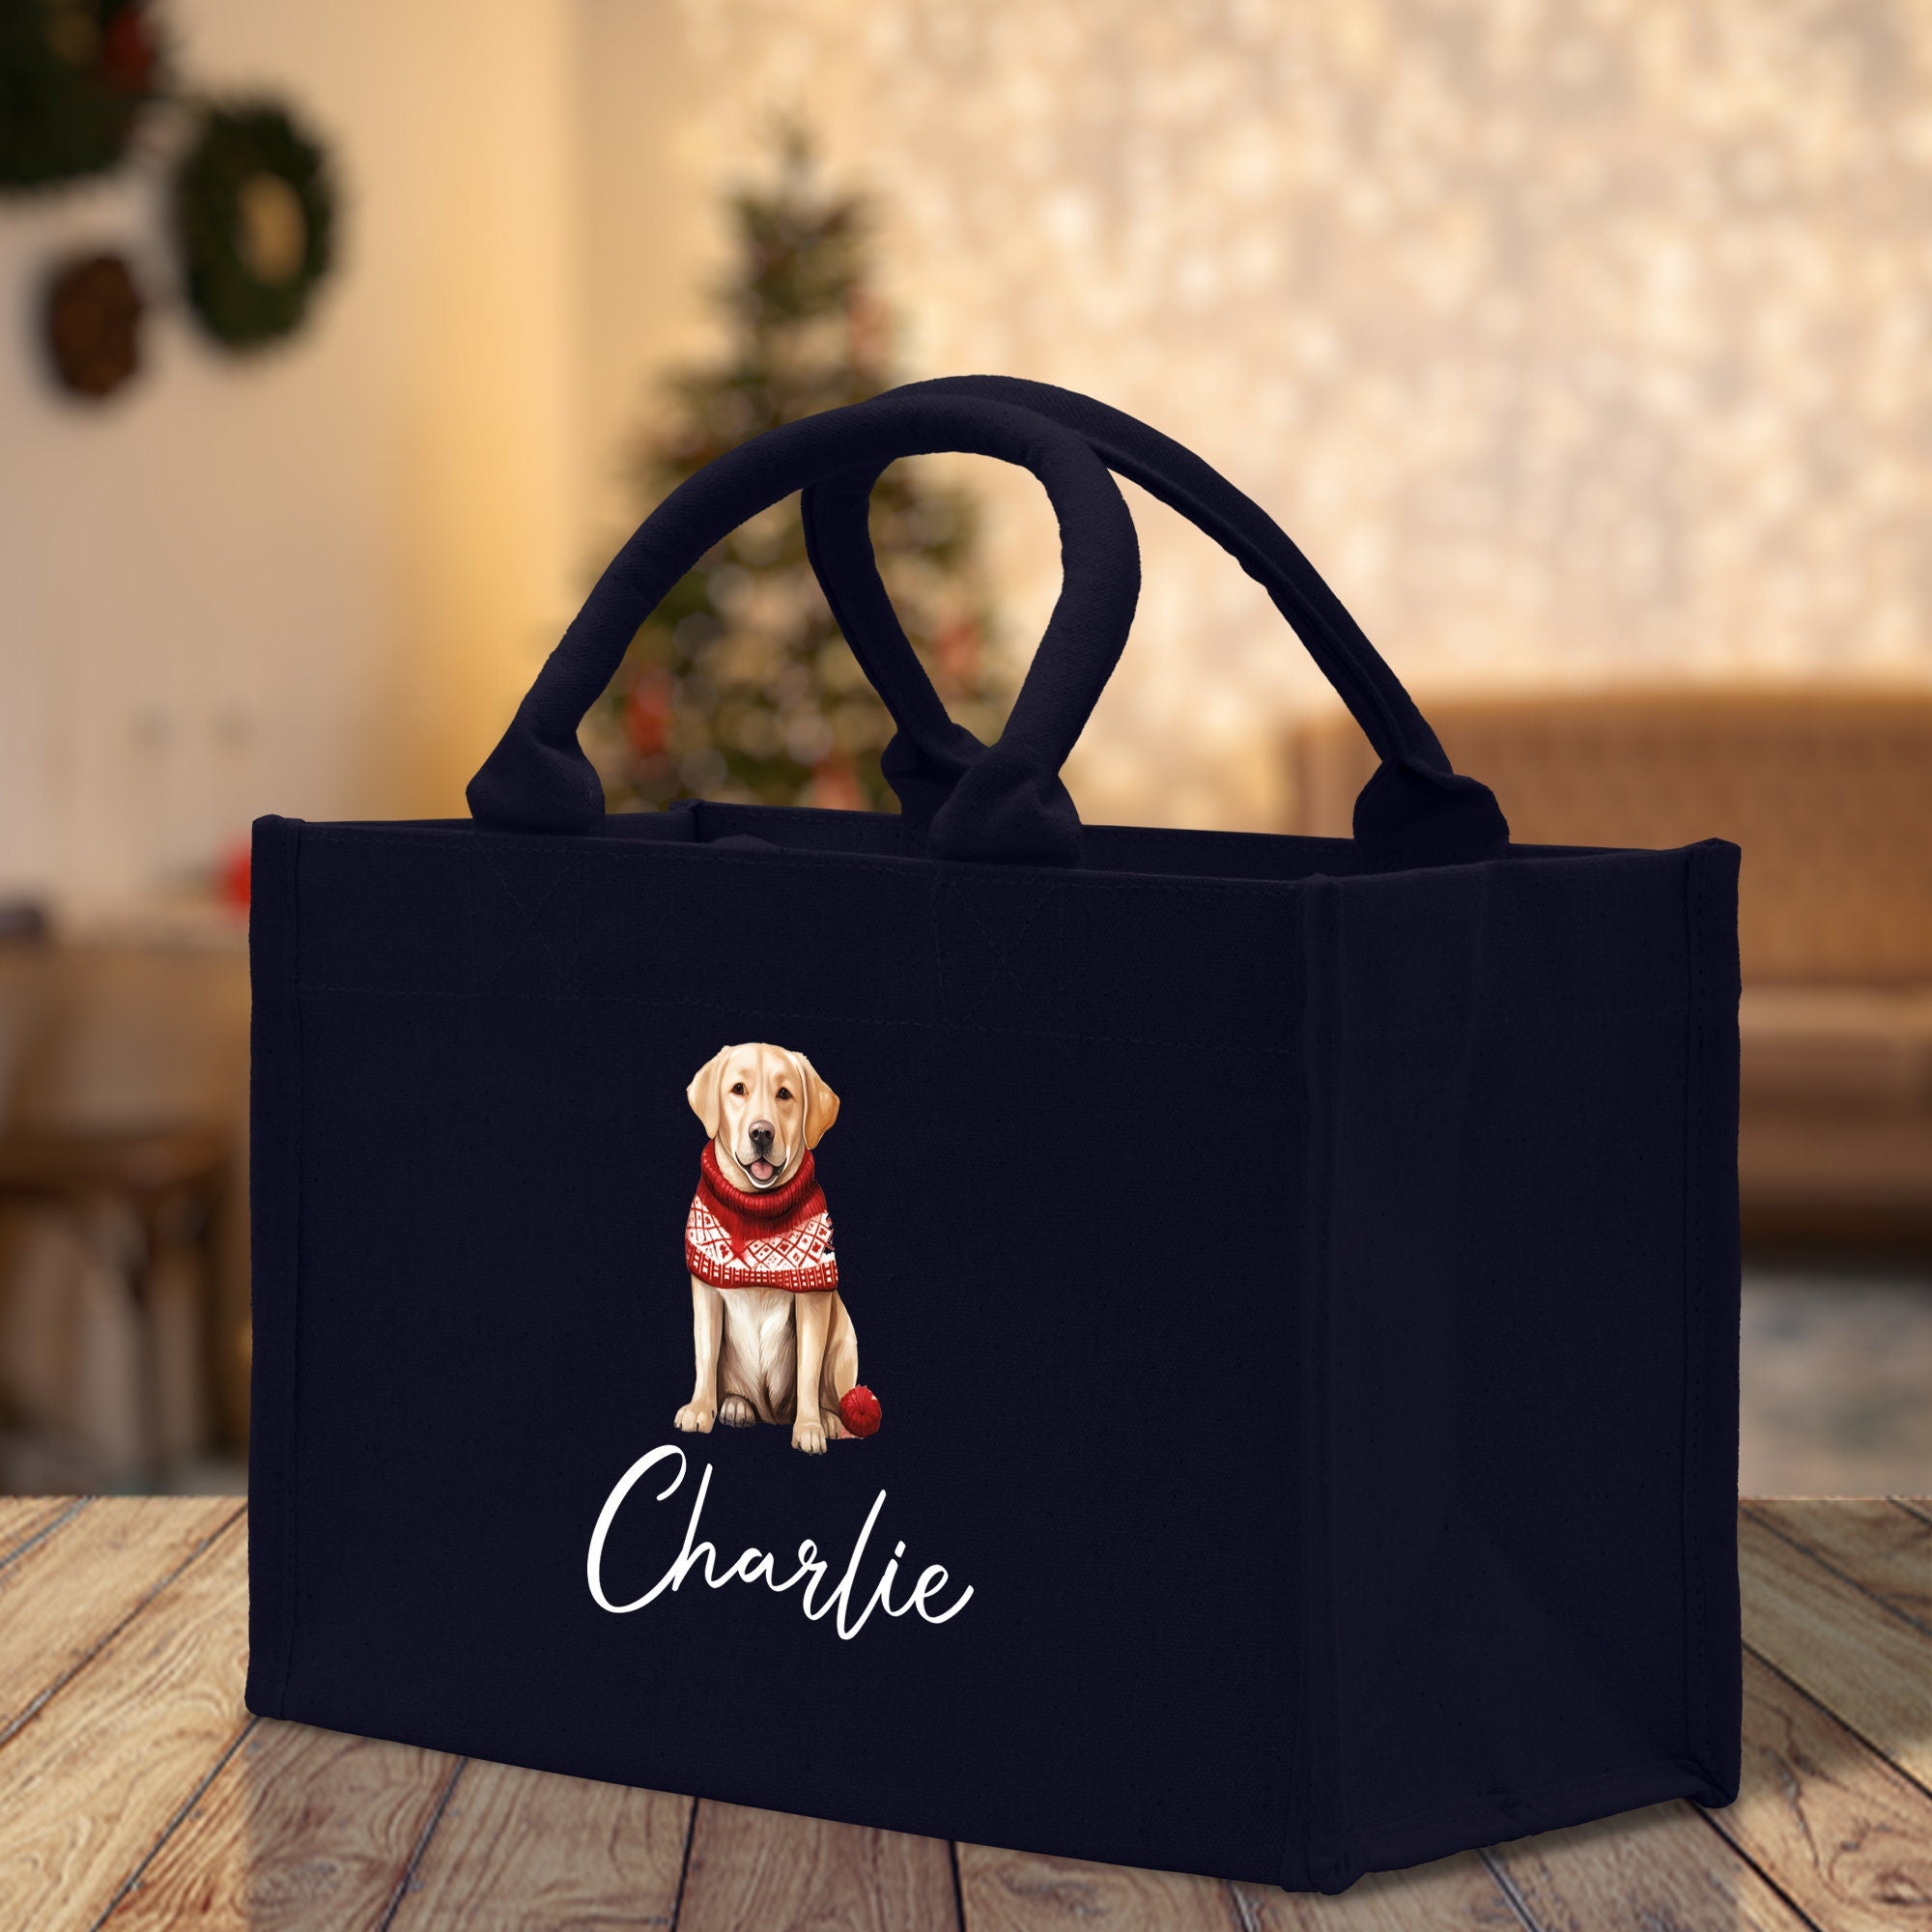 a black bag with a picture of a dog on it